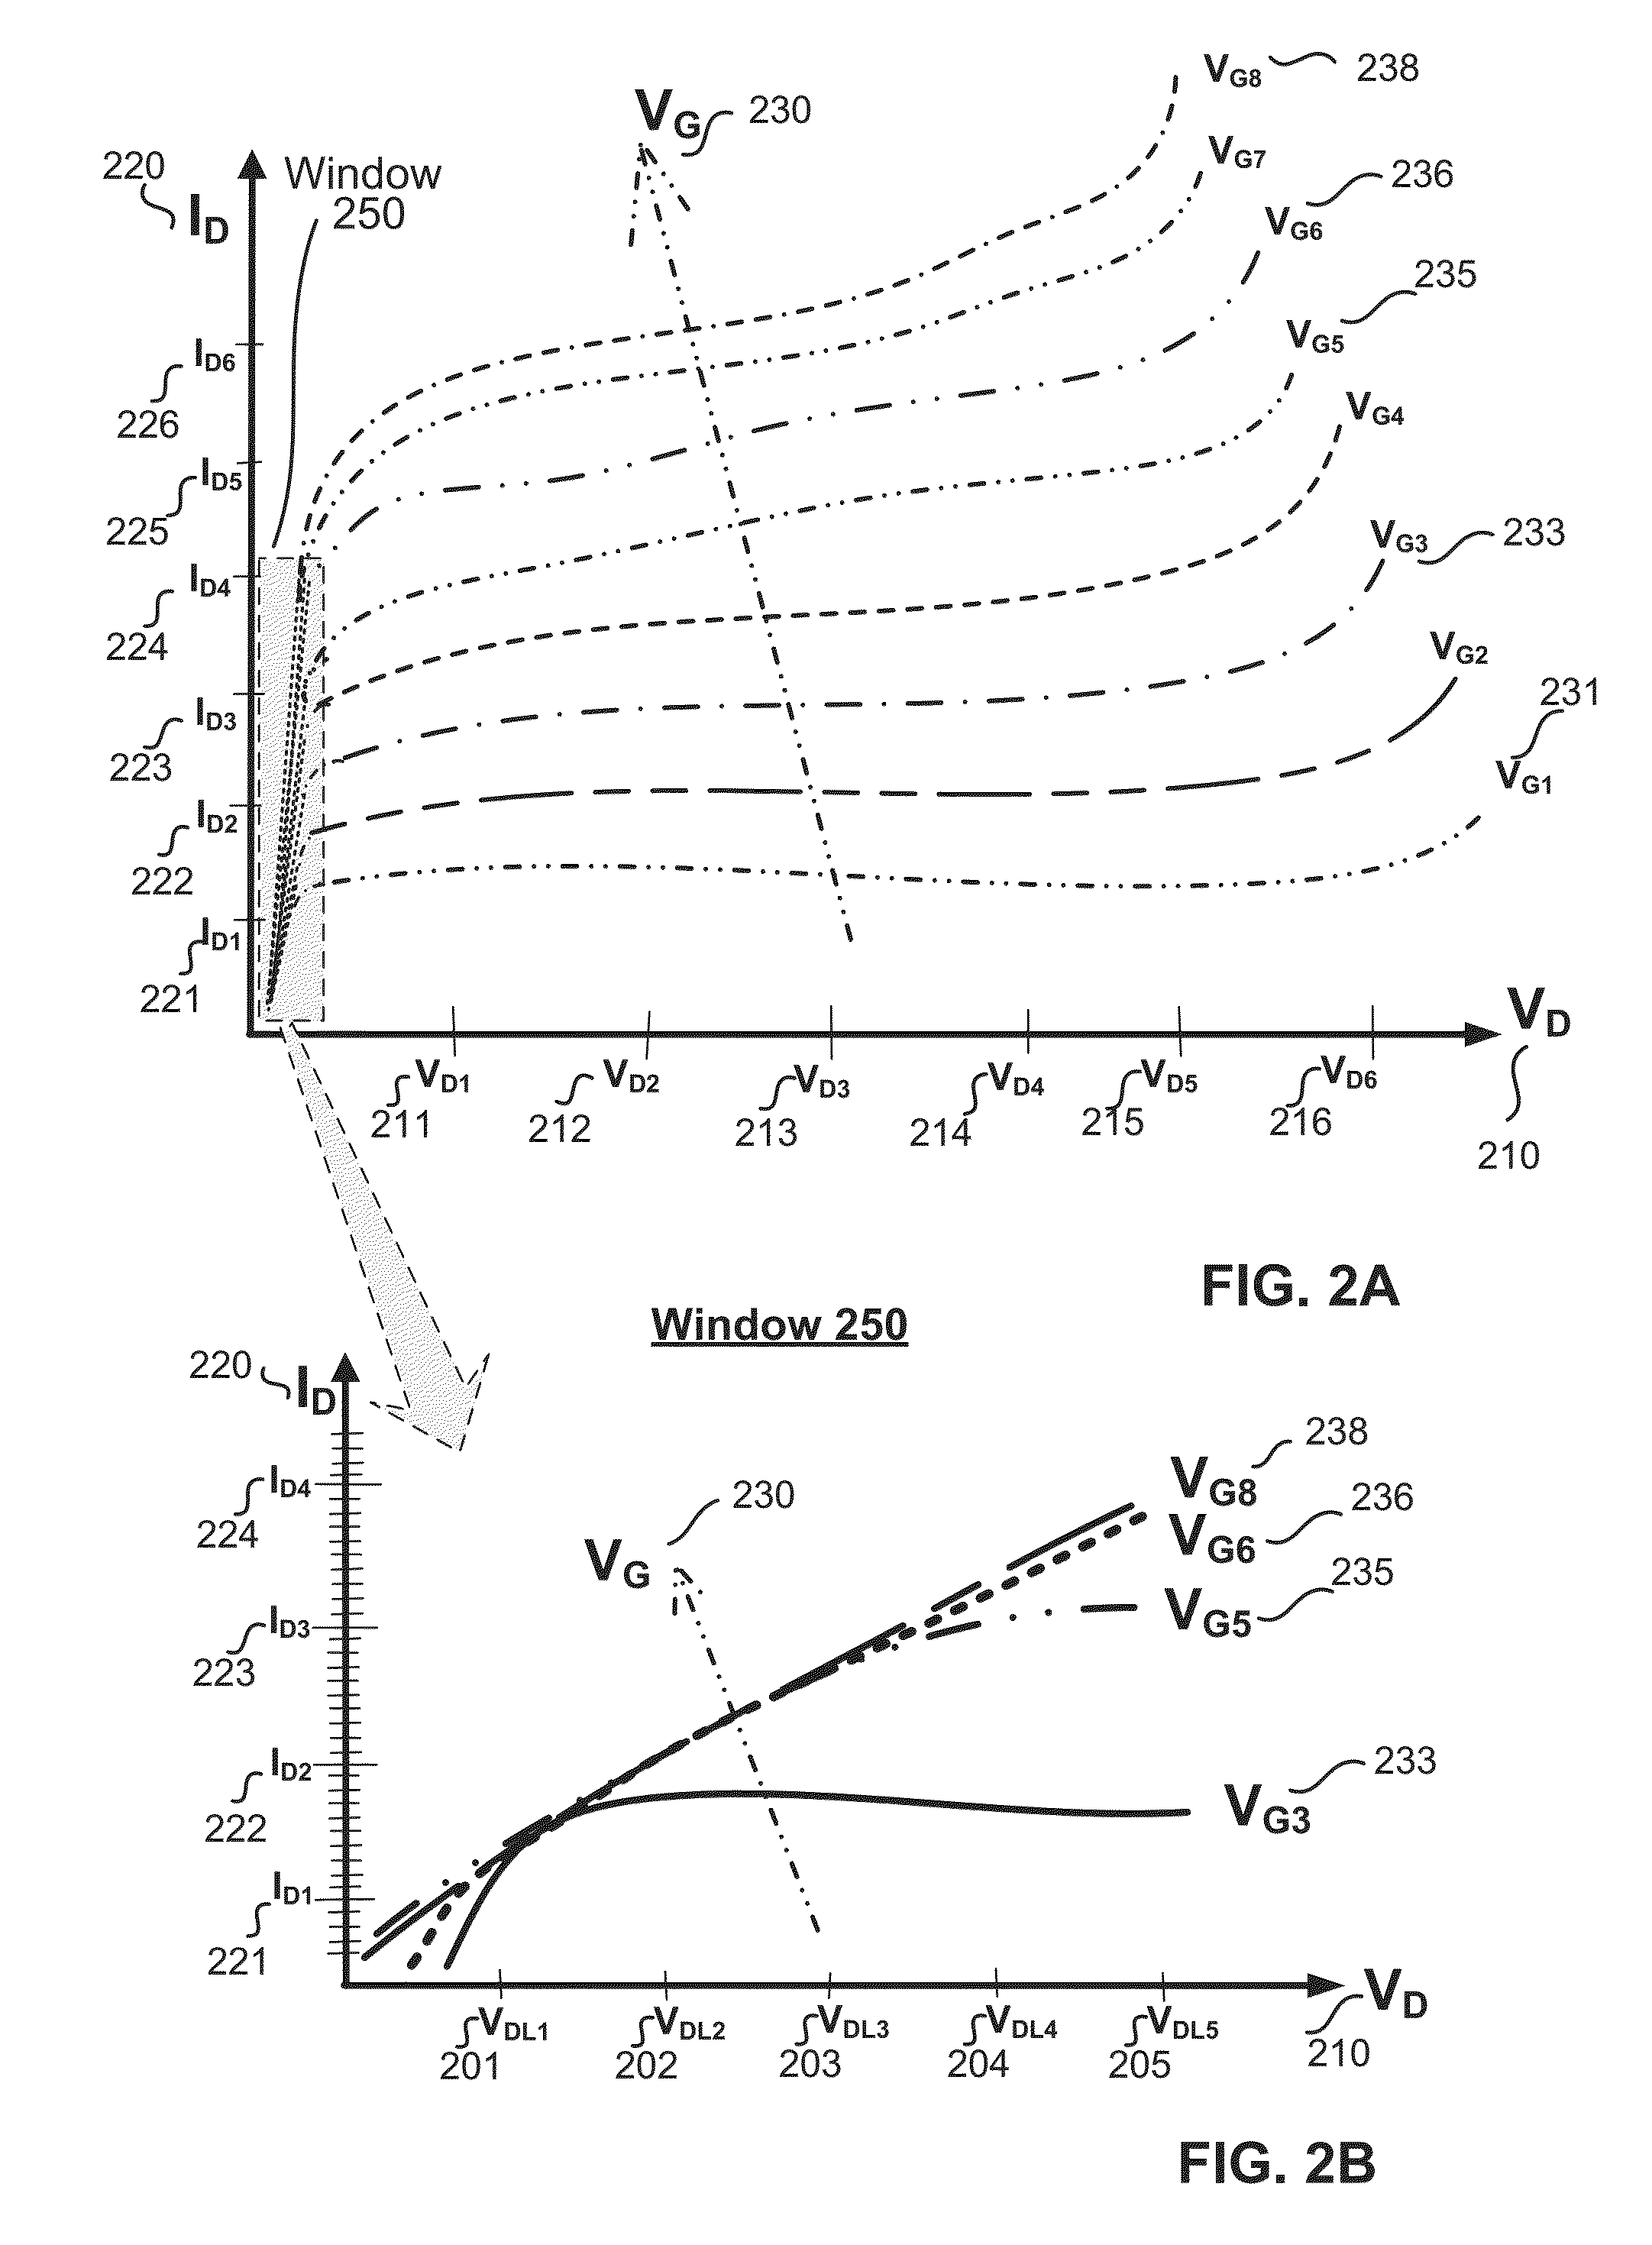 Mosfet driver with pulse timing pattern fault detection and adaptive safe operating area mode of operation